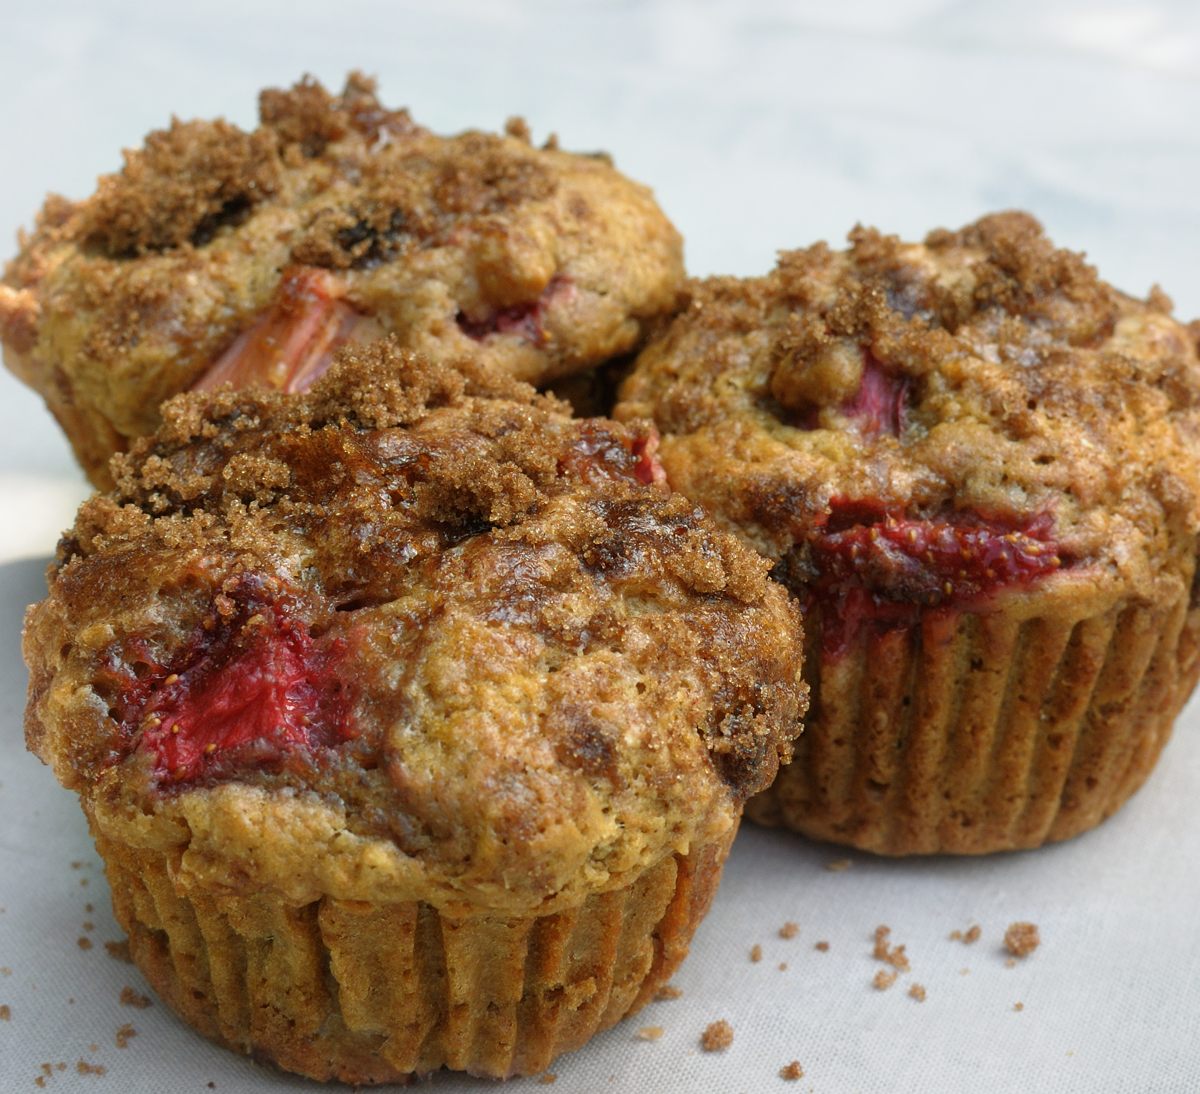 3 Strawberry Rhubarb Muffins with Brown Sugar Topping